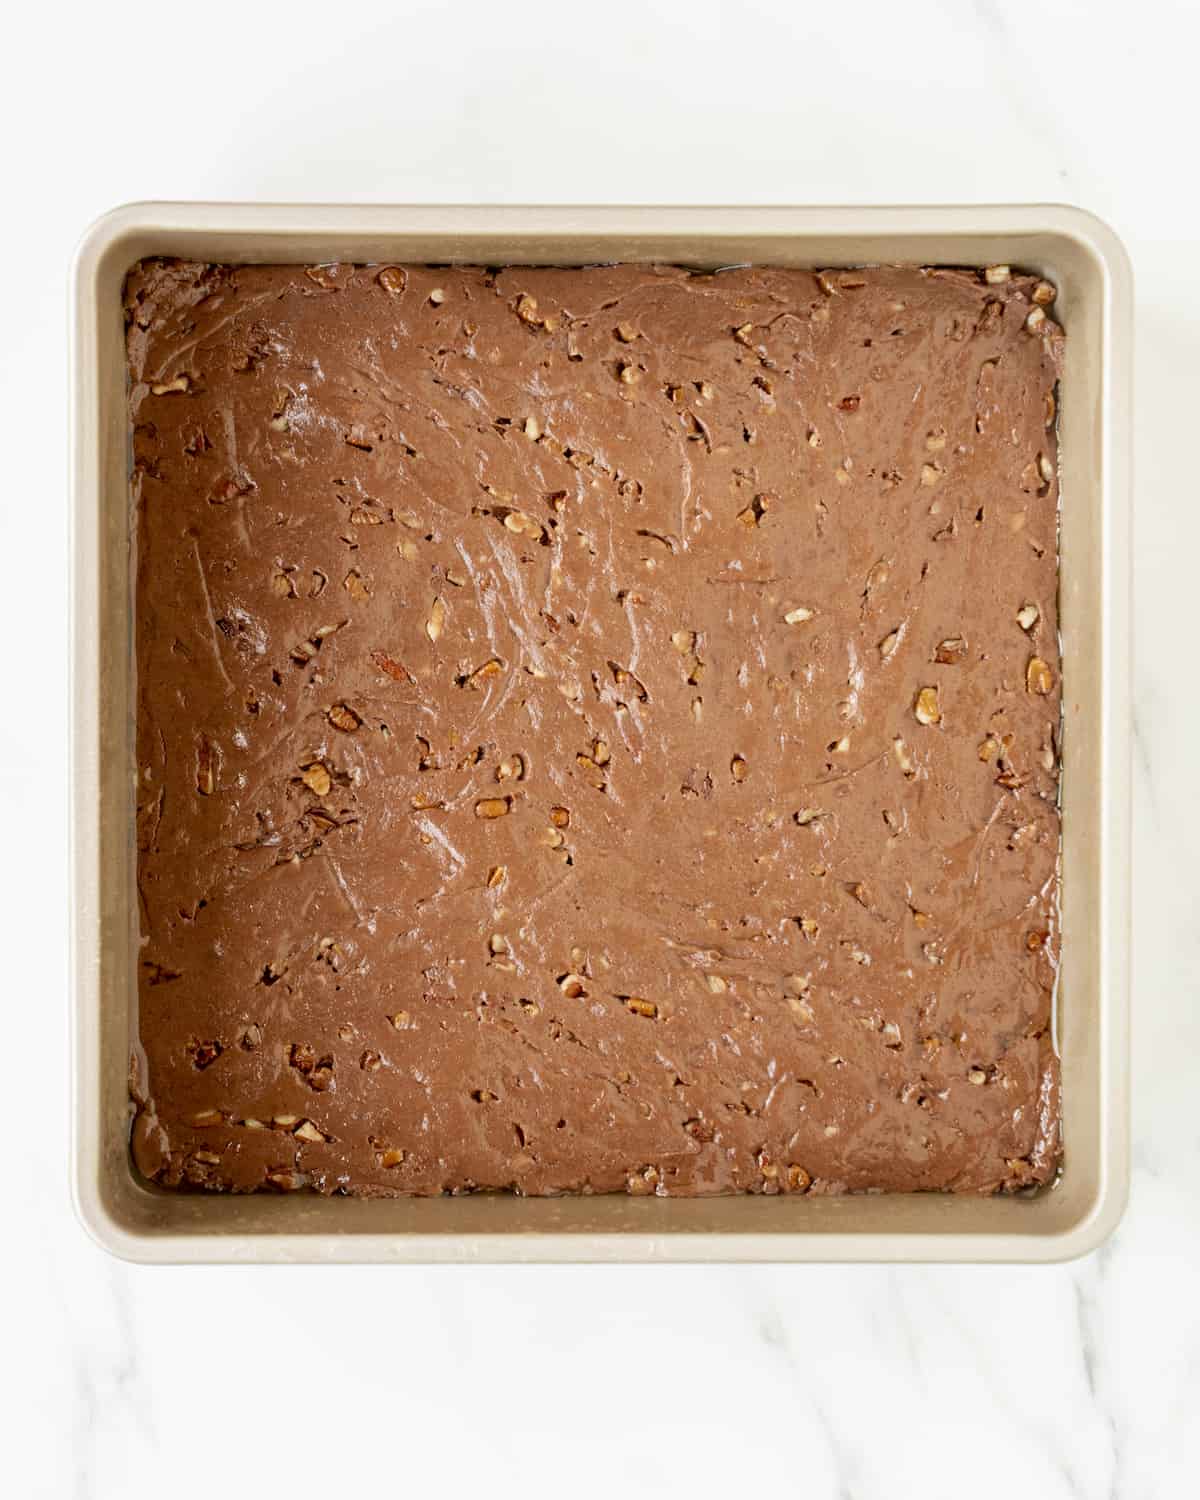 A square baking pan filled with the brownie batter.  